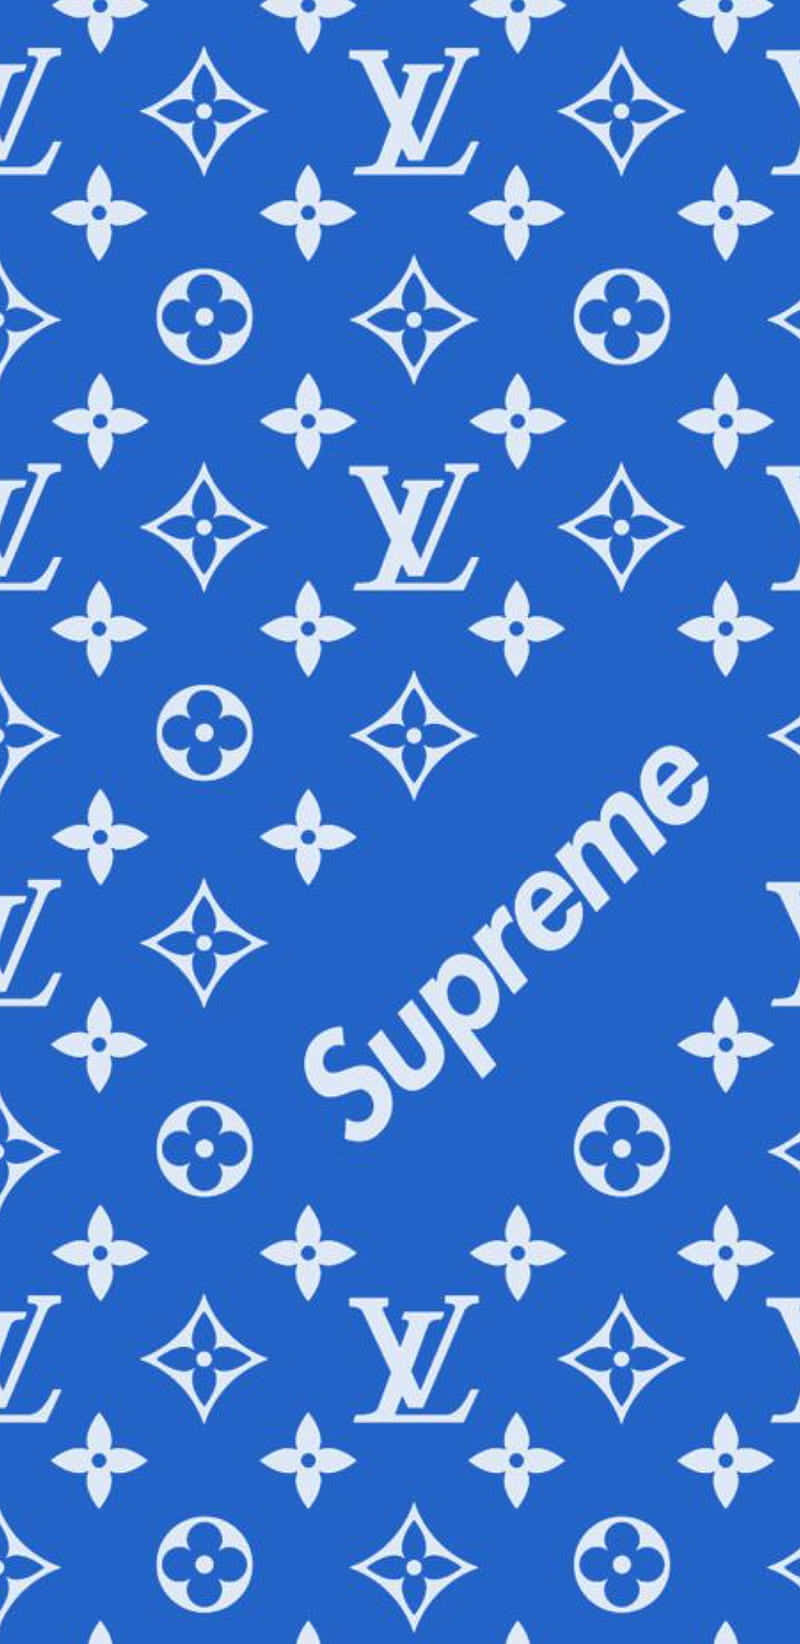 Keep it Supreme with Blue Supreme Wallpaper